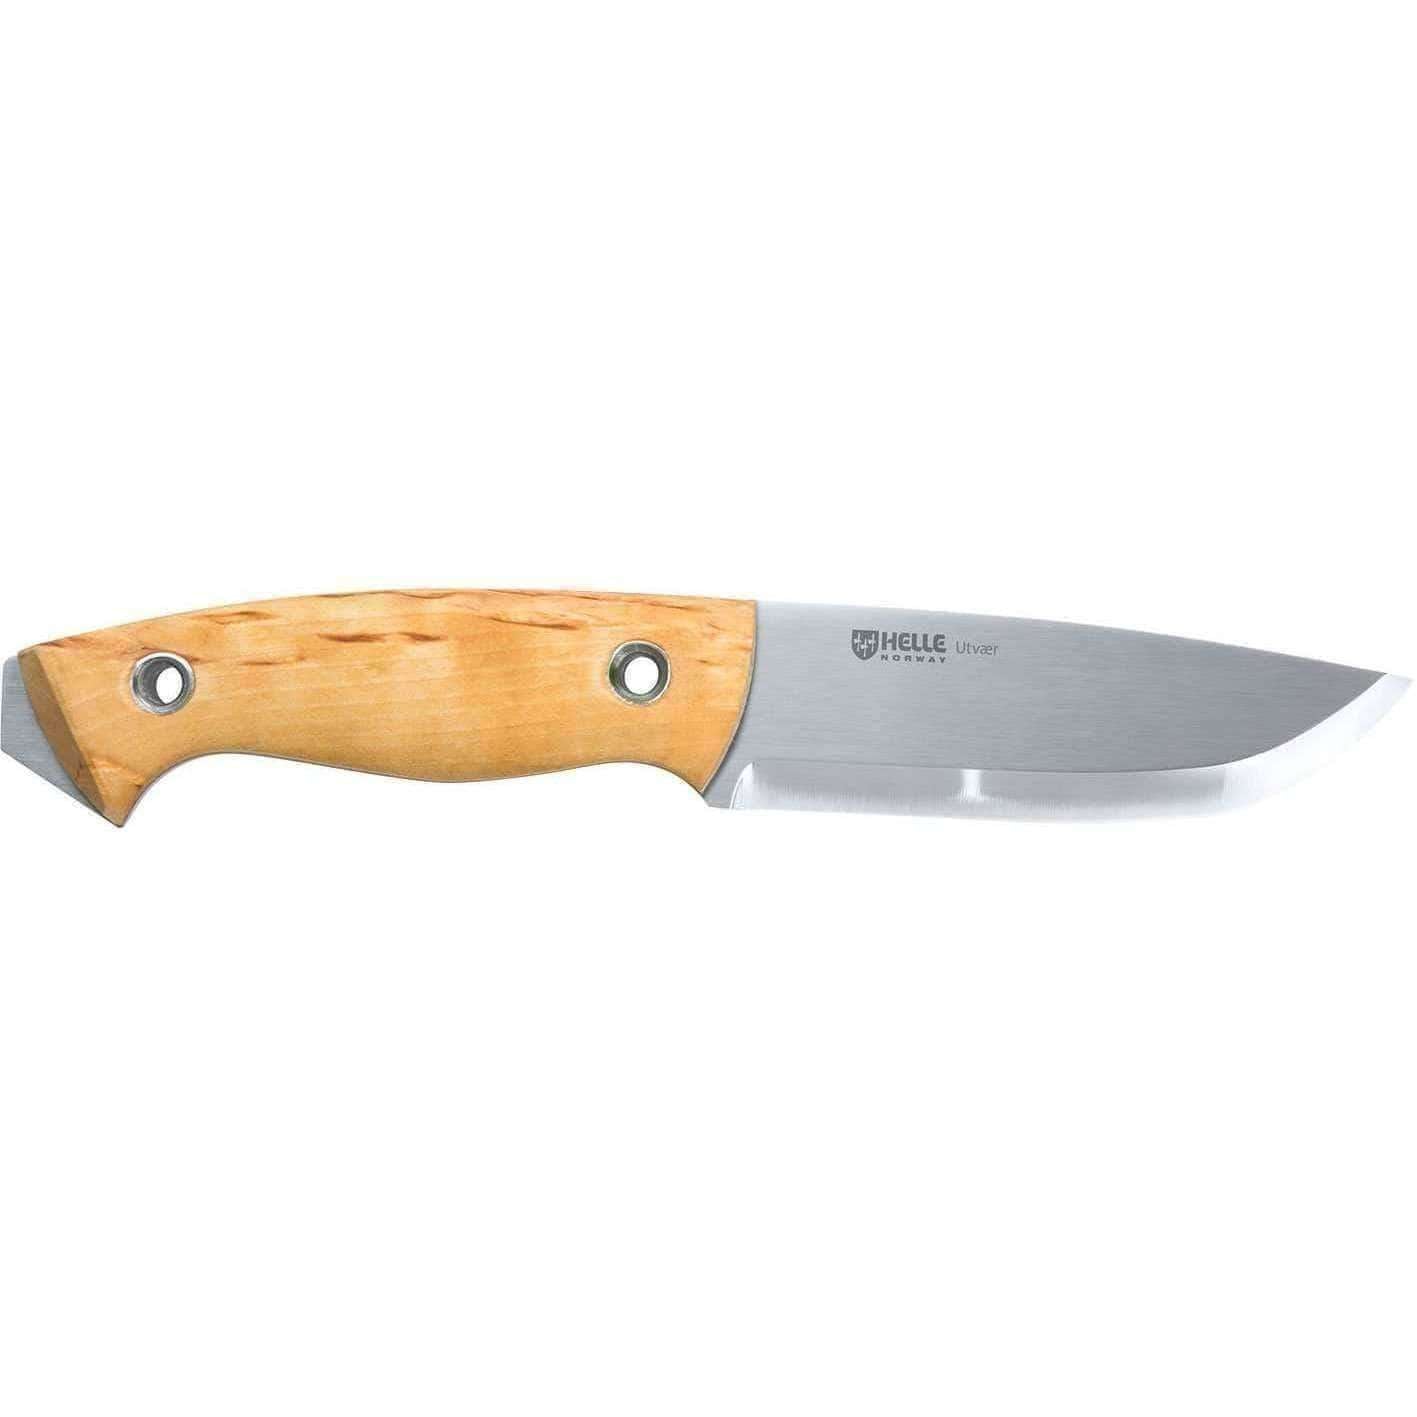 Helle, Helle Utvaer Knife, Fixed Blade Bushcraft Knives, Wylies Outdoor World,